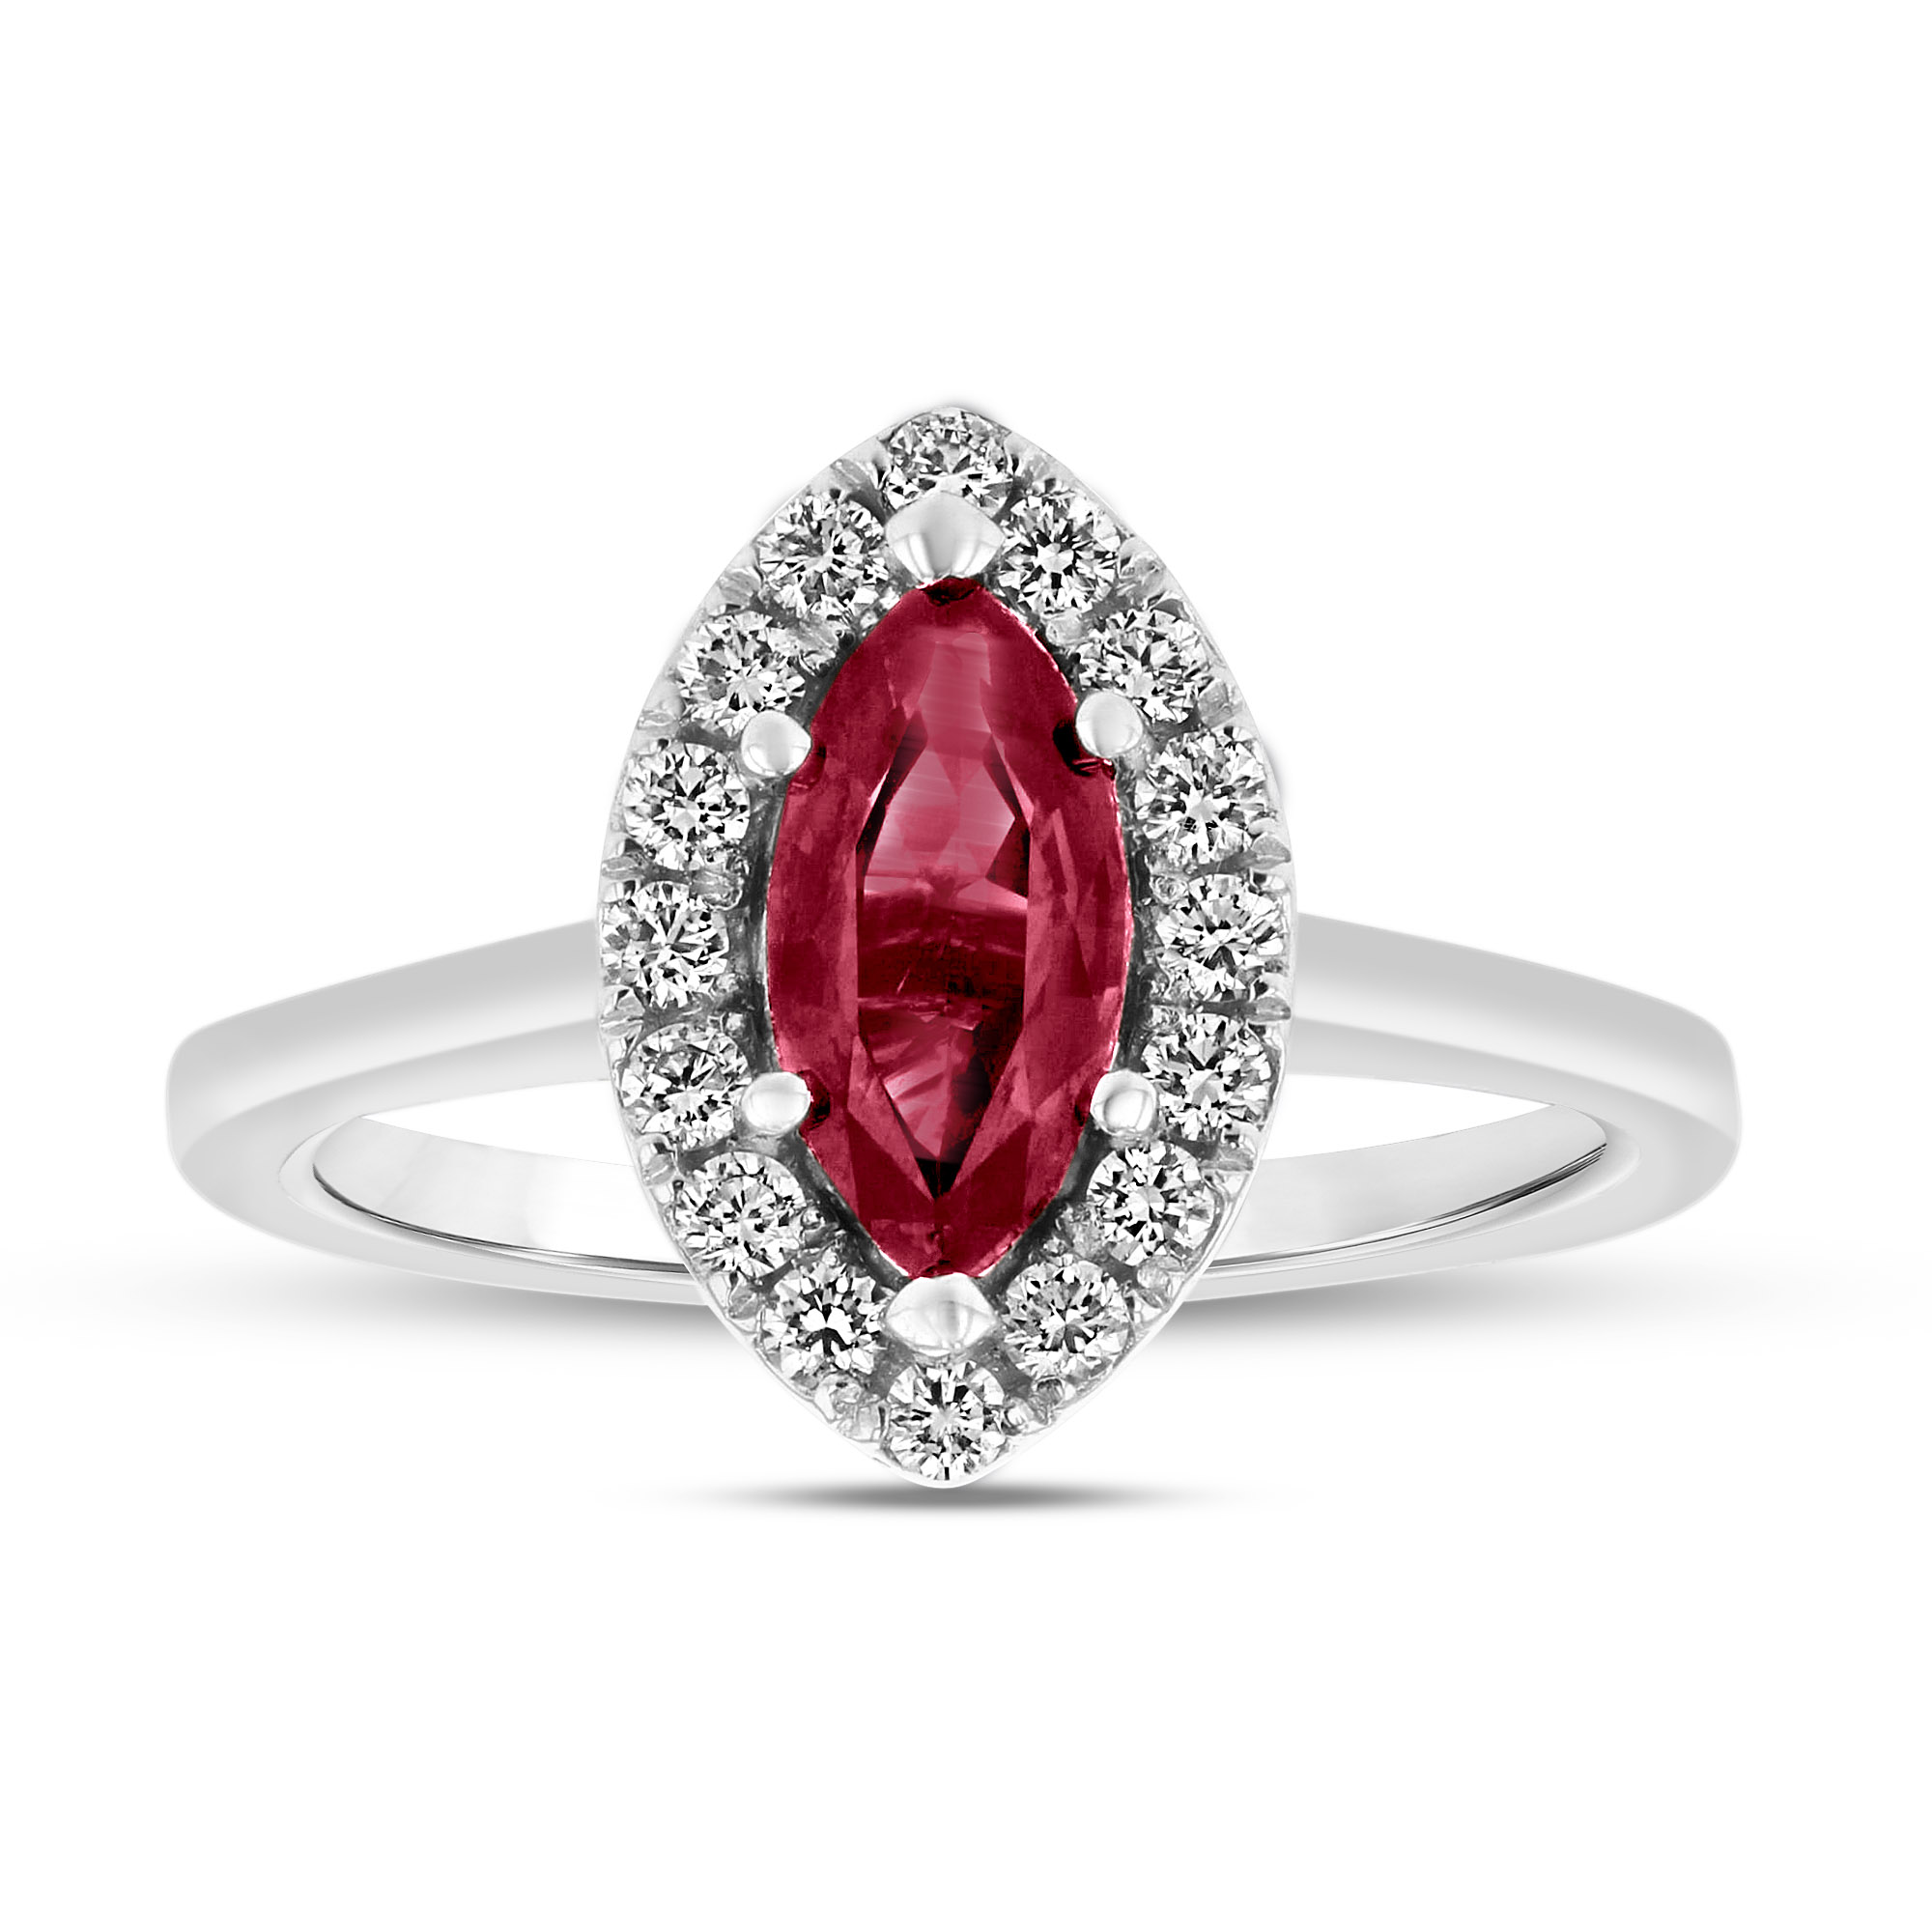 1.37ctw Diamond and Ruby Ring in 14k White Gold